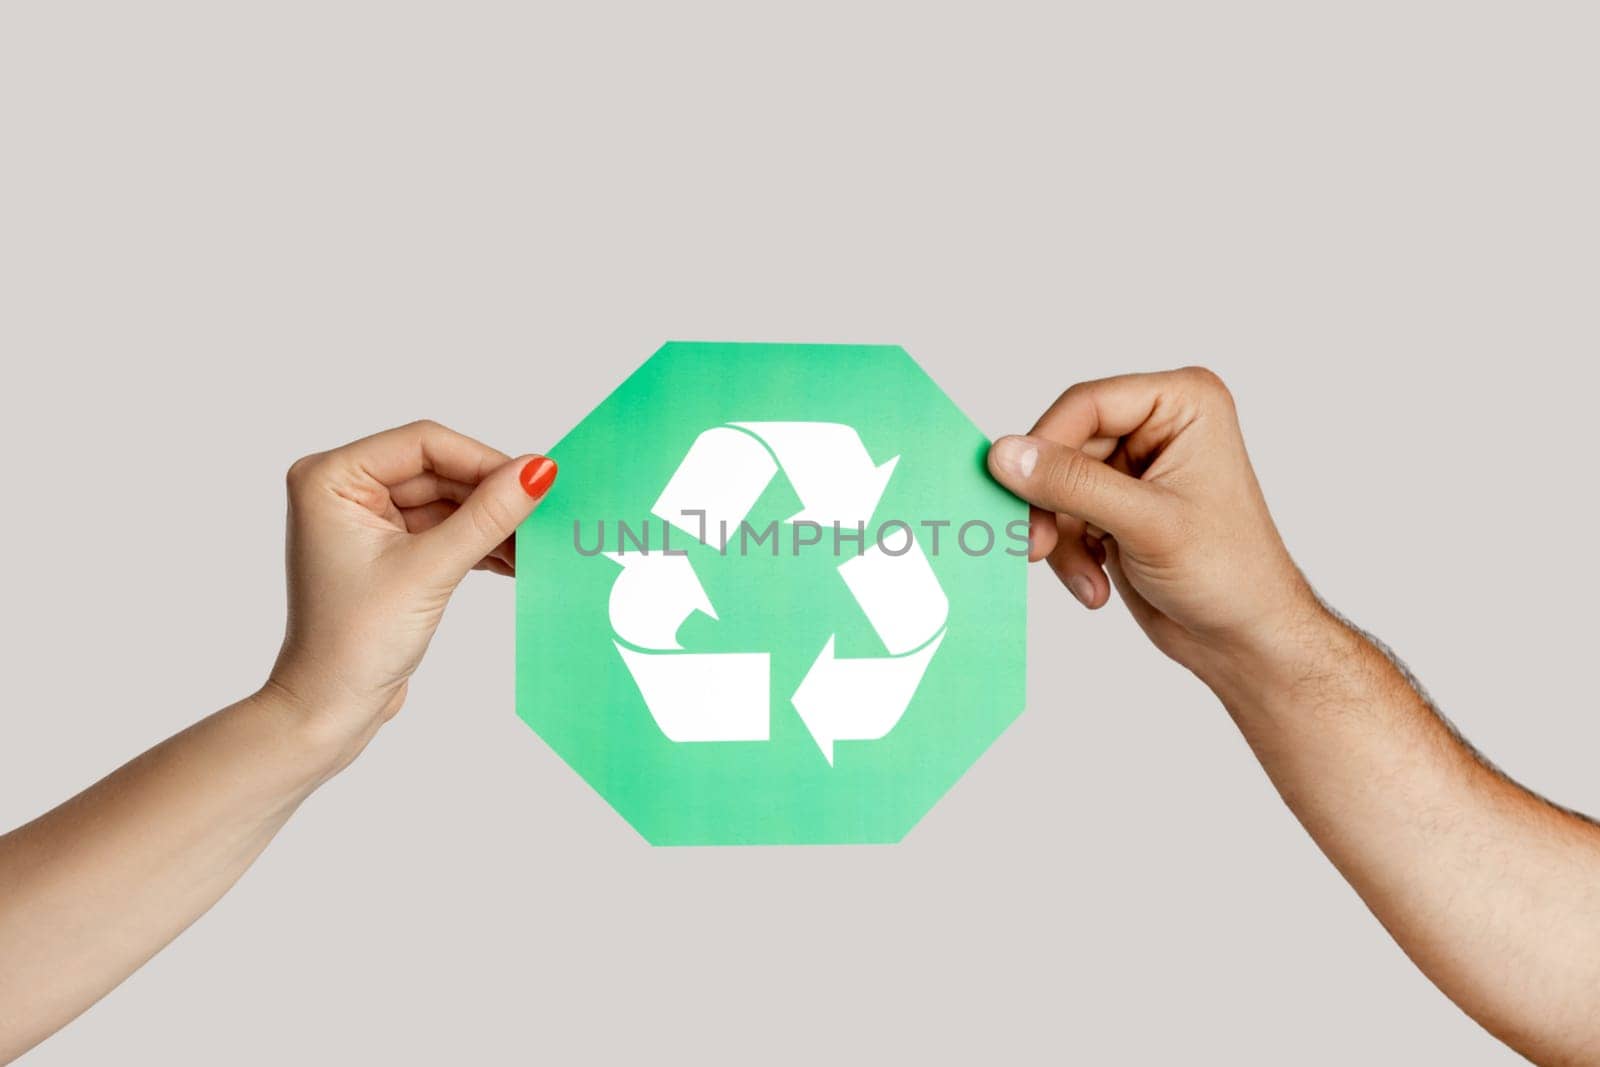 Closeup of woman and man hand holding green recycling sign, ecological icon, environment protection. Indoor studio shot isolated on gray background.